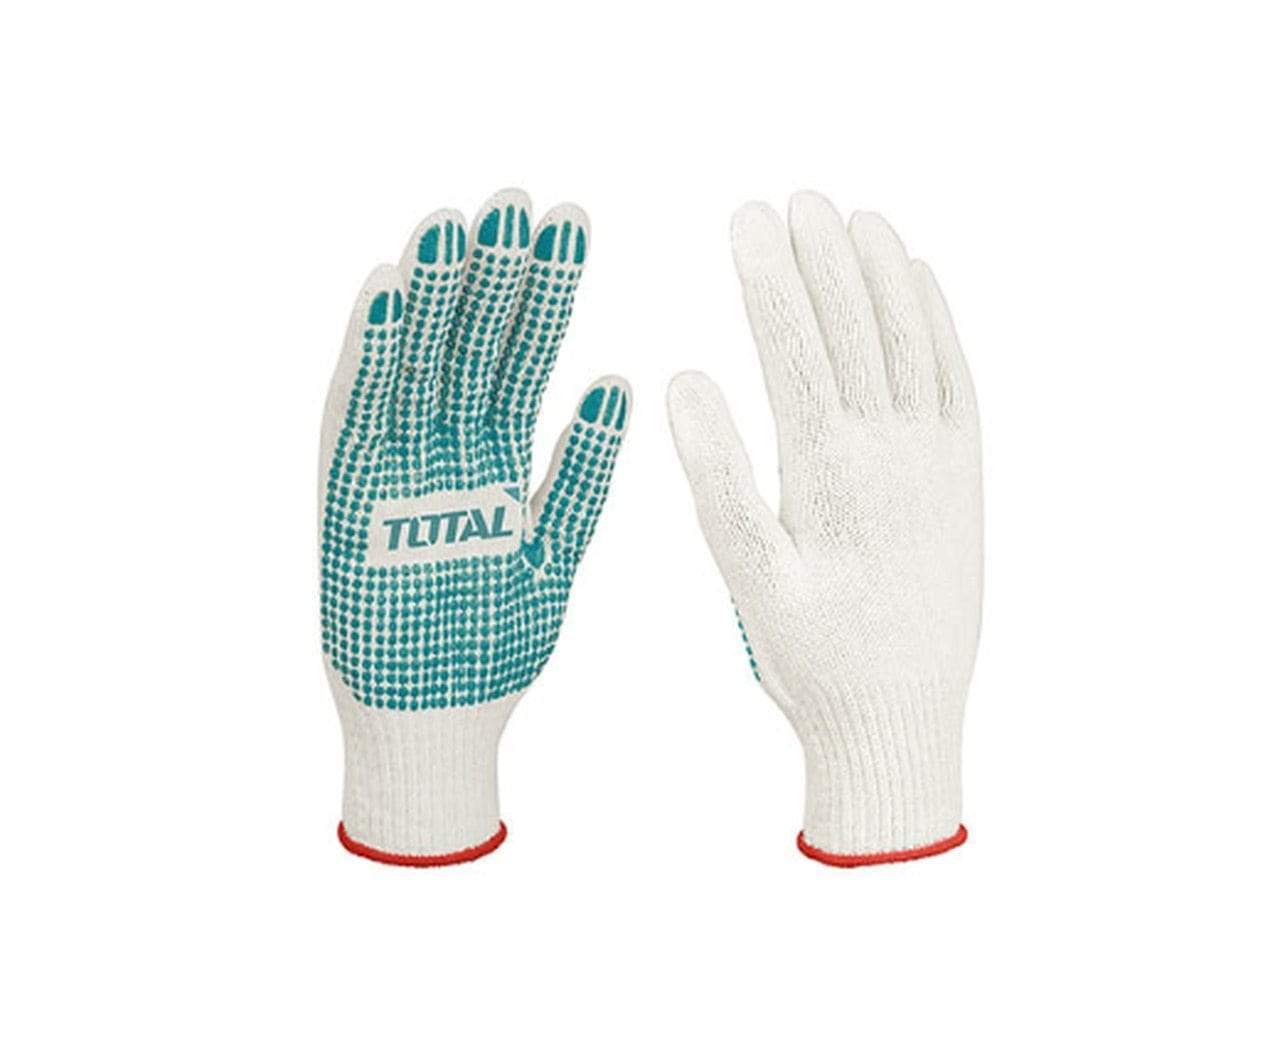 Total Knitted & PVC dots Gloves - TSP11102 | Supply Master | Accra, Ghana Tools Building Steel Engineering Hardware tool